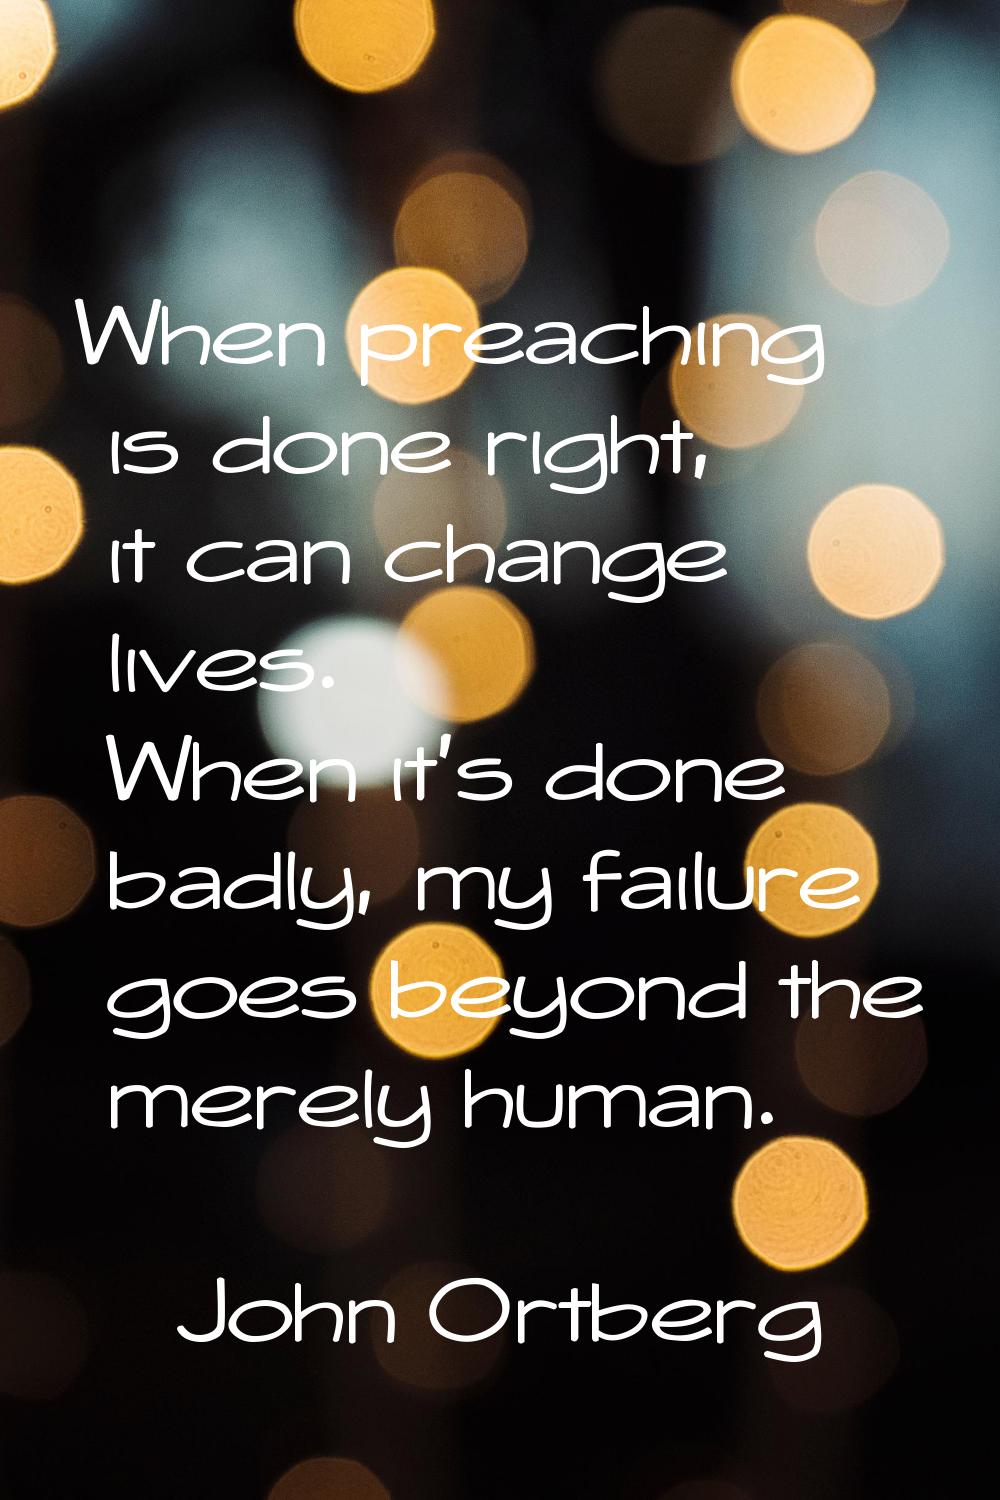 When preaching is done right, it can change lives. When it's done badly, my failure goes beyond the